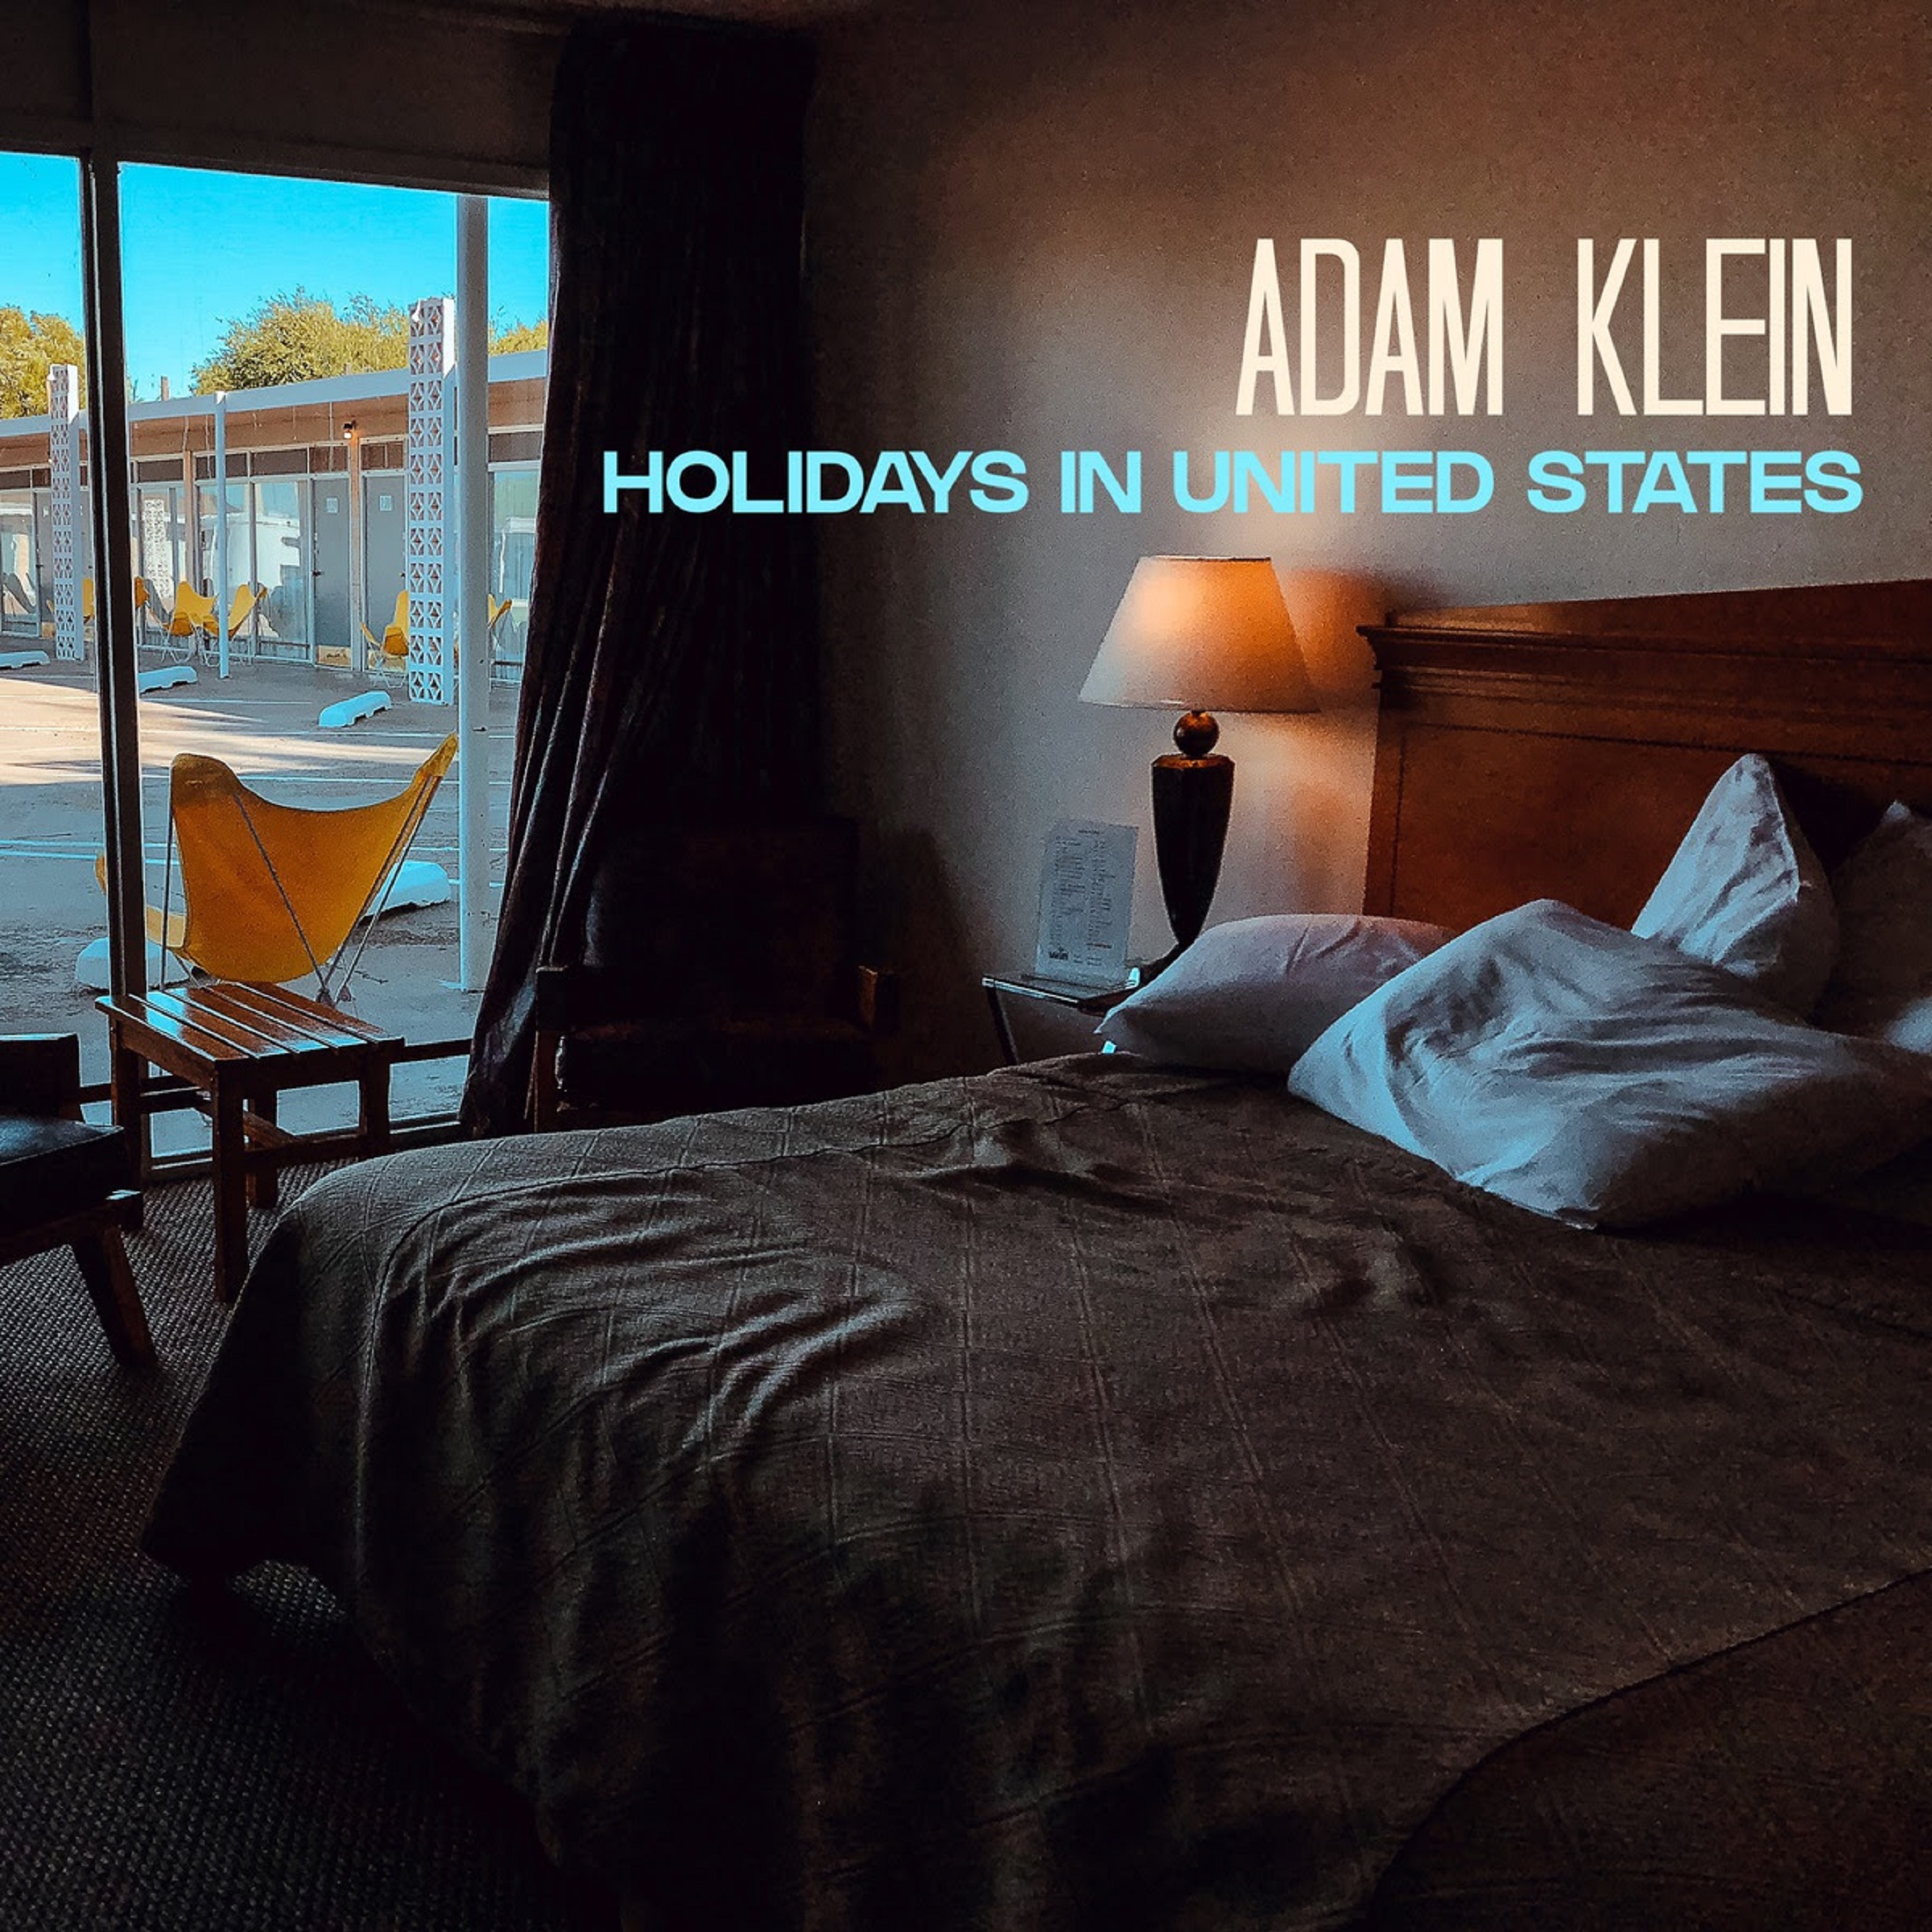 Adam Klein releases new LP, "Holidays in United States"